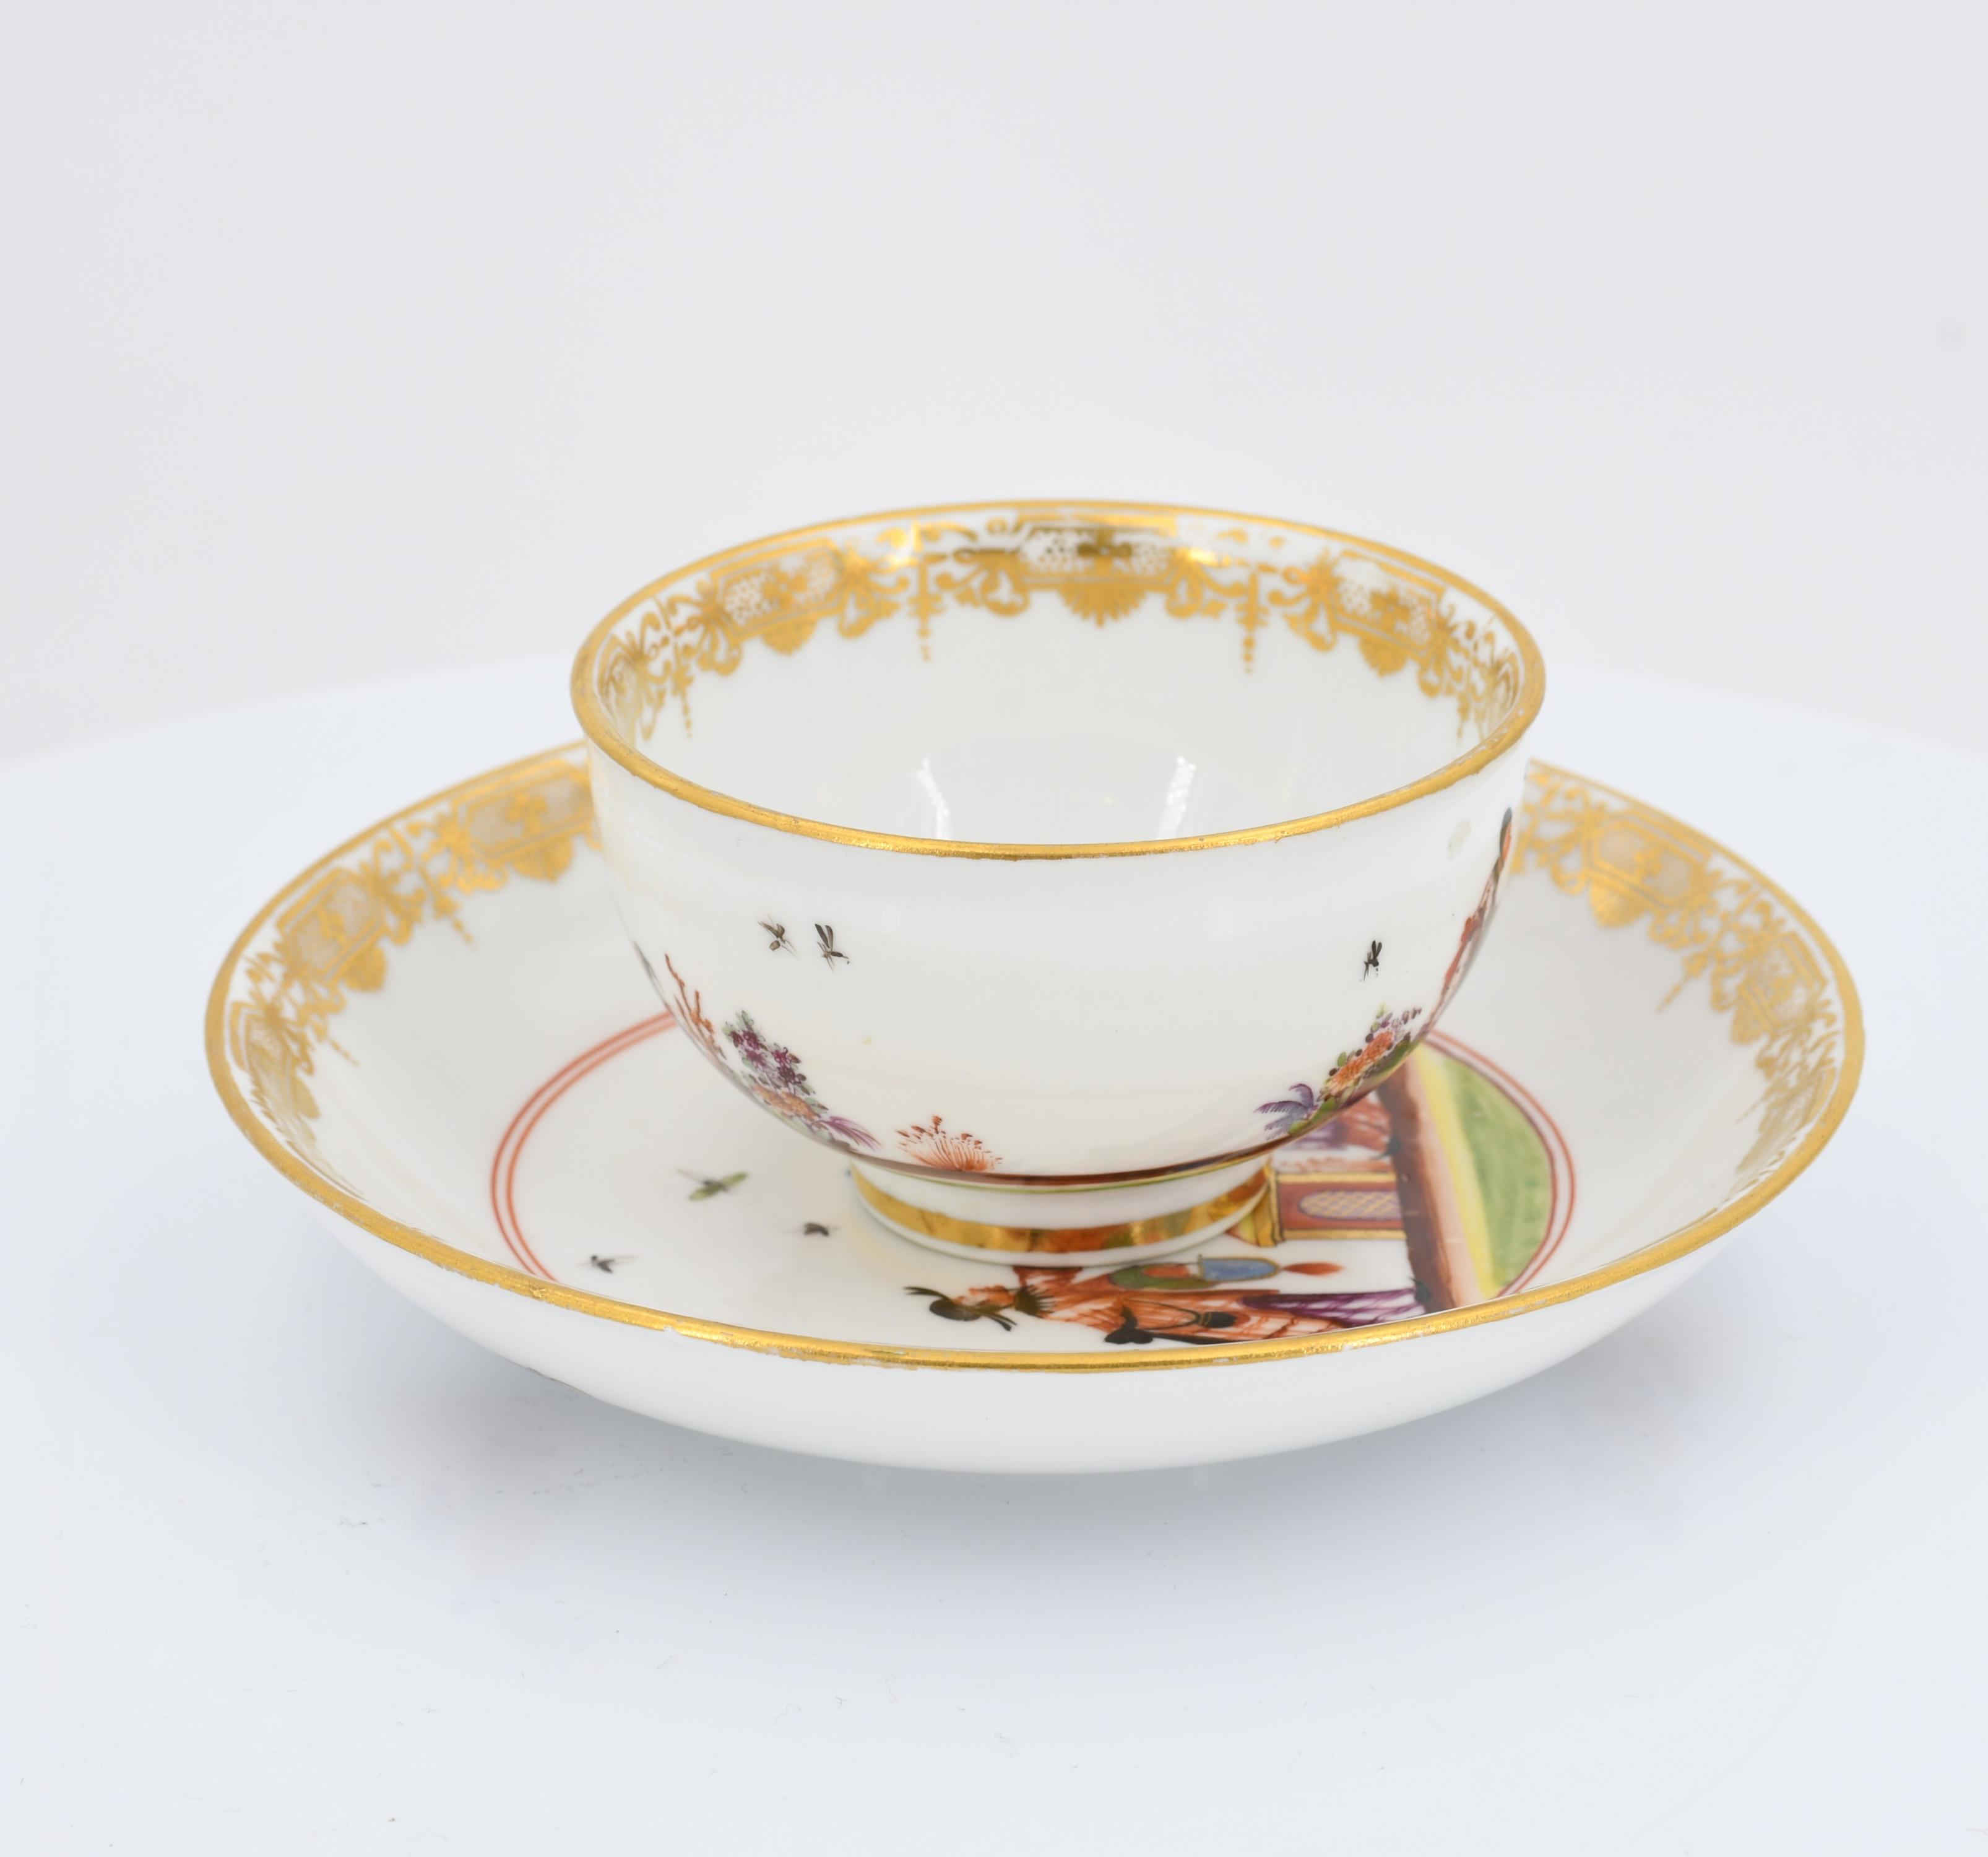 Tea bowl and saucer with chinoiseries - Image 5 of 7